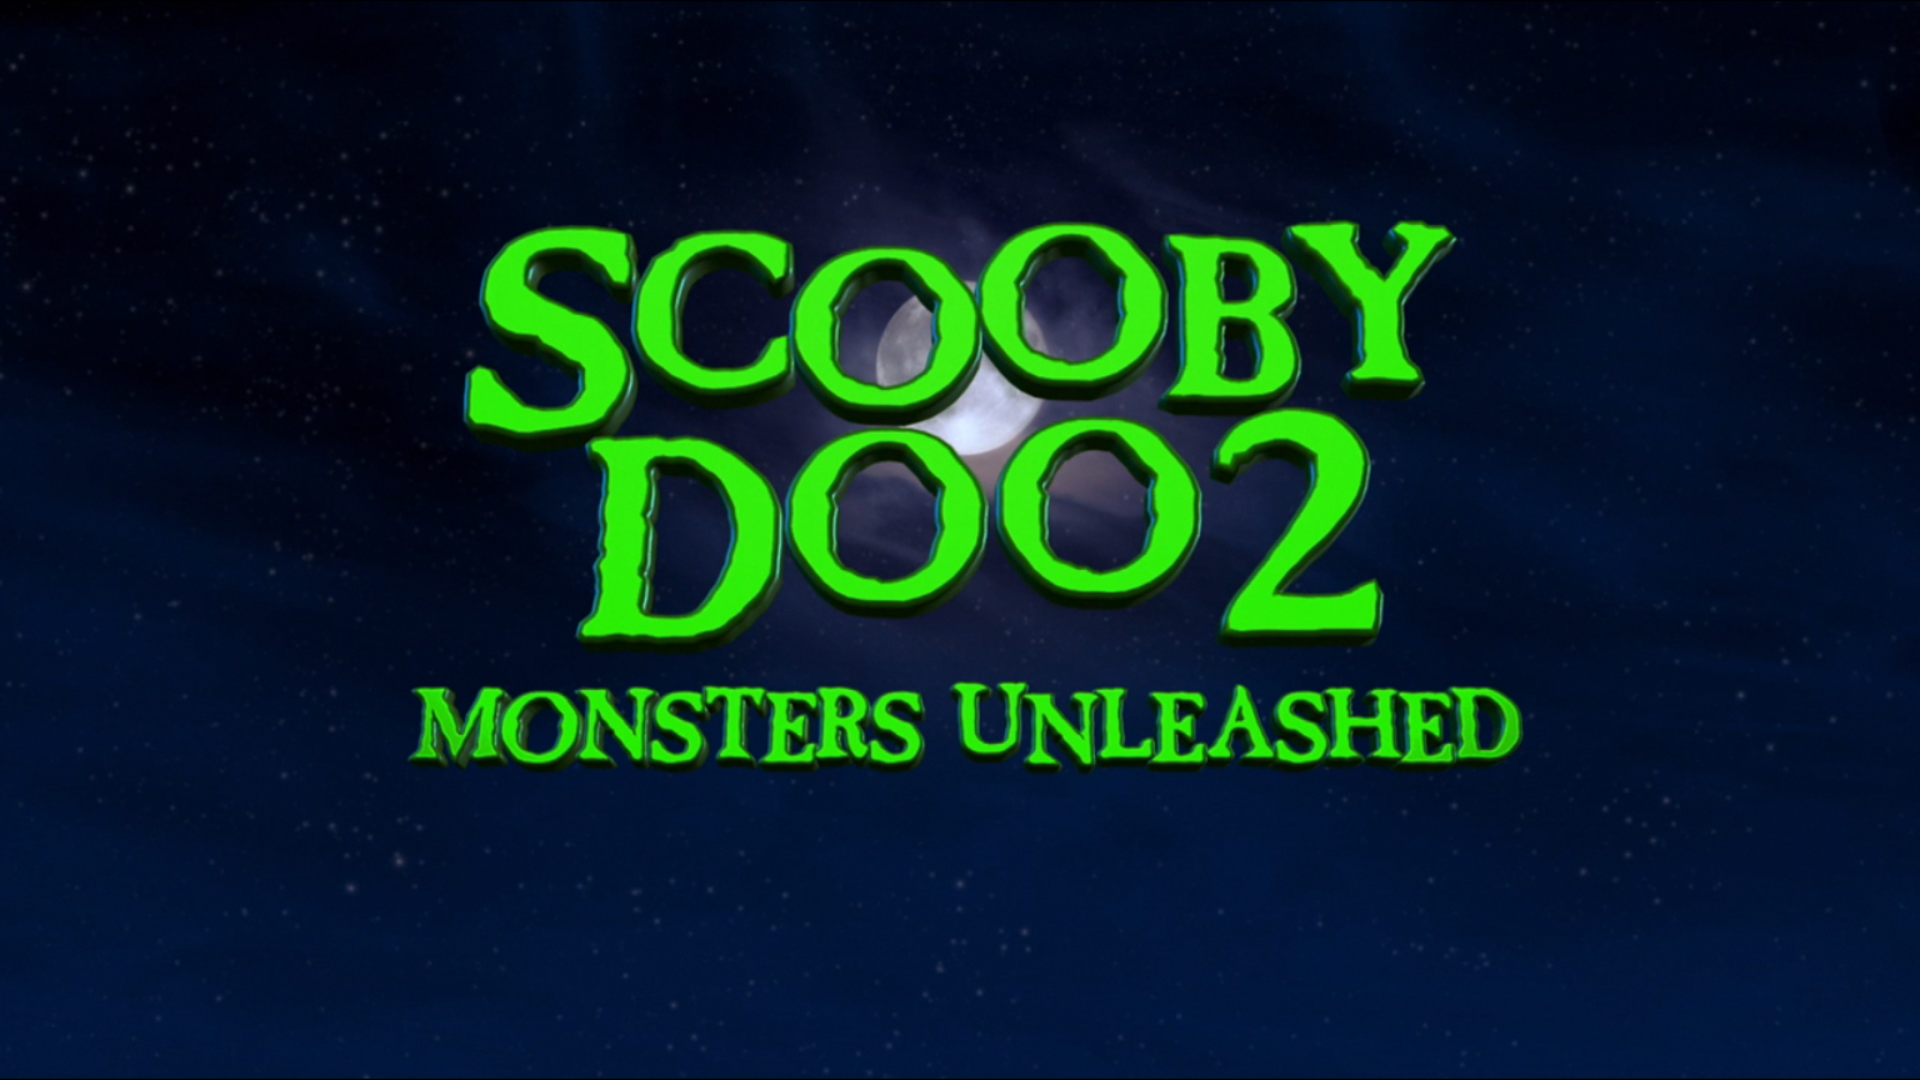 scooby doo 2 monsters unleashed 2004